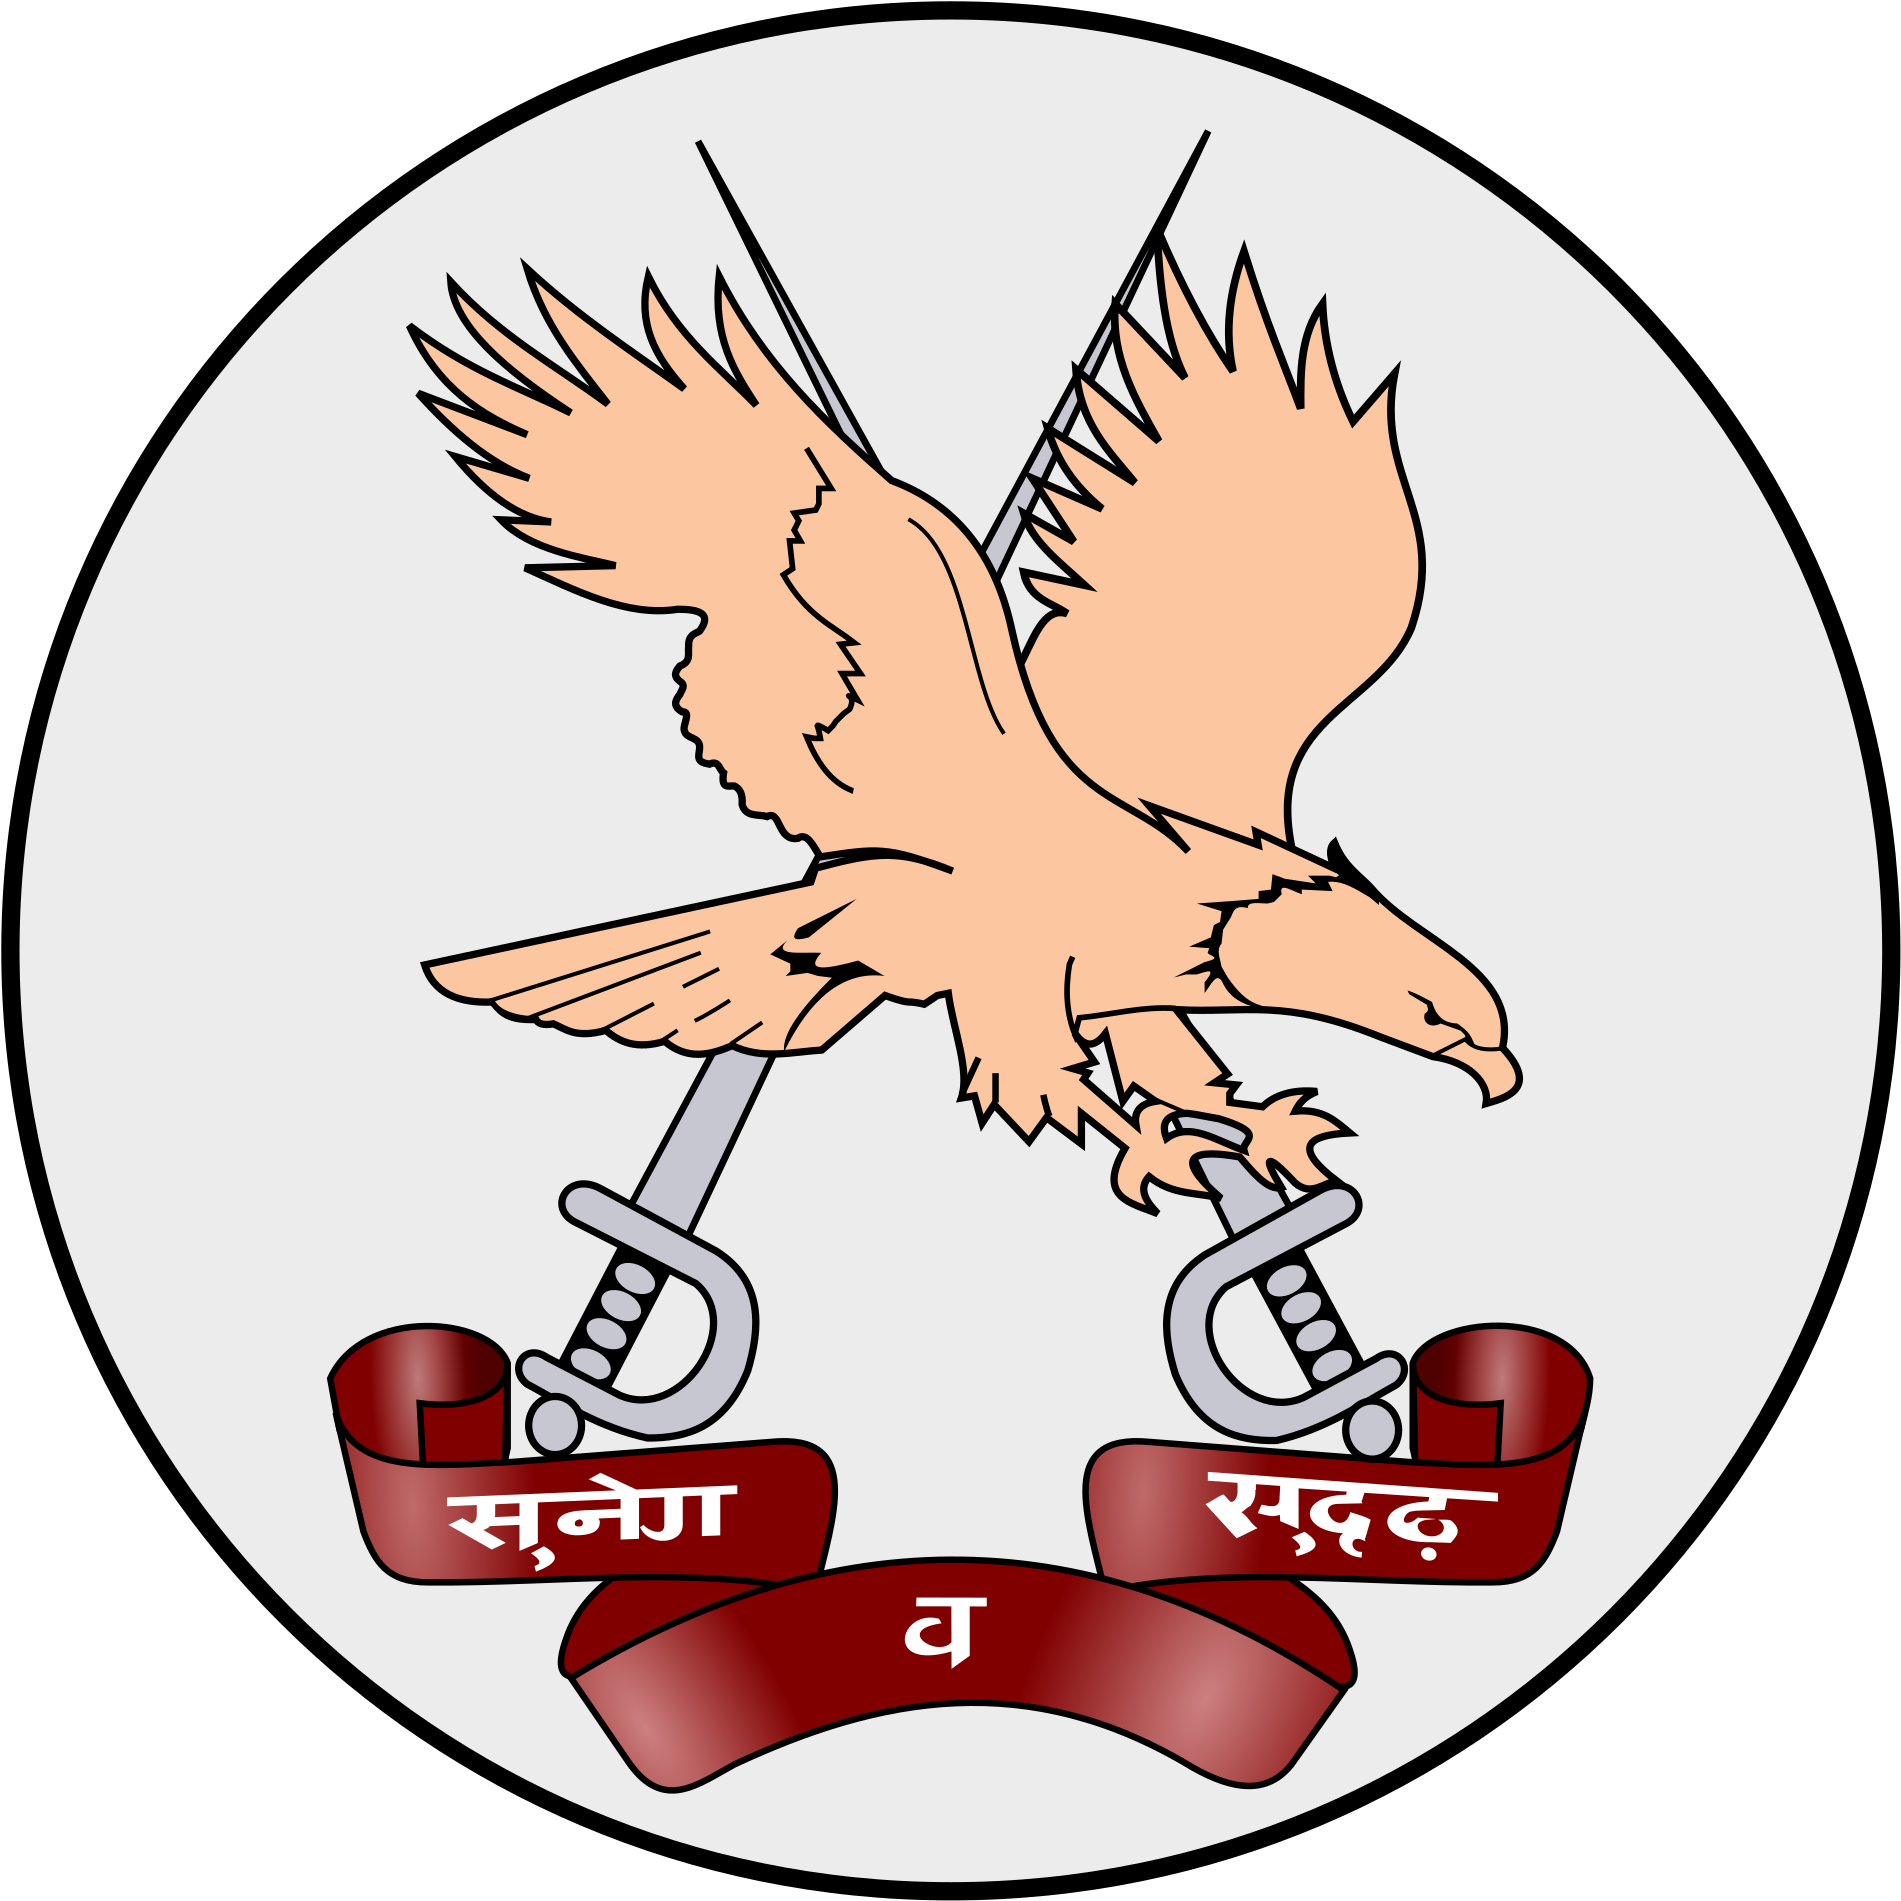 Clipart Of Wikipedia, Corps And Indian Army General - Indian Army Aviation Logo (2000x2000)